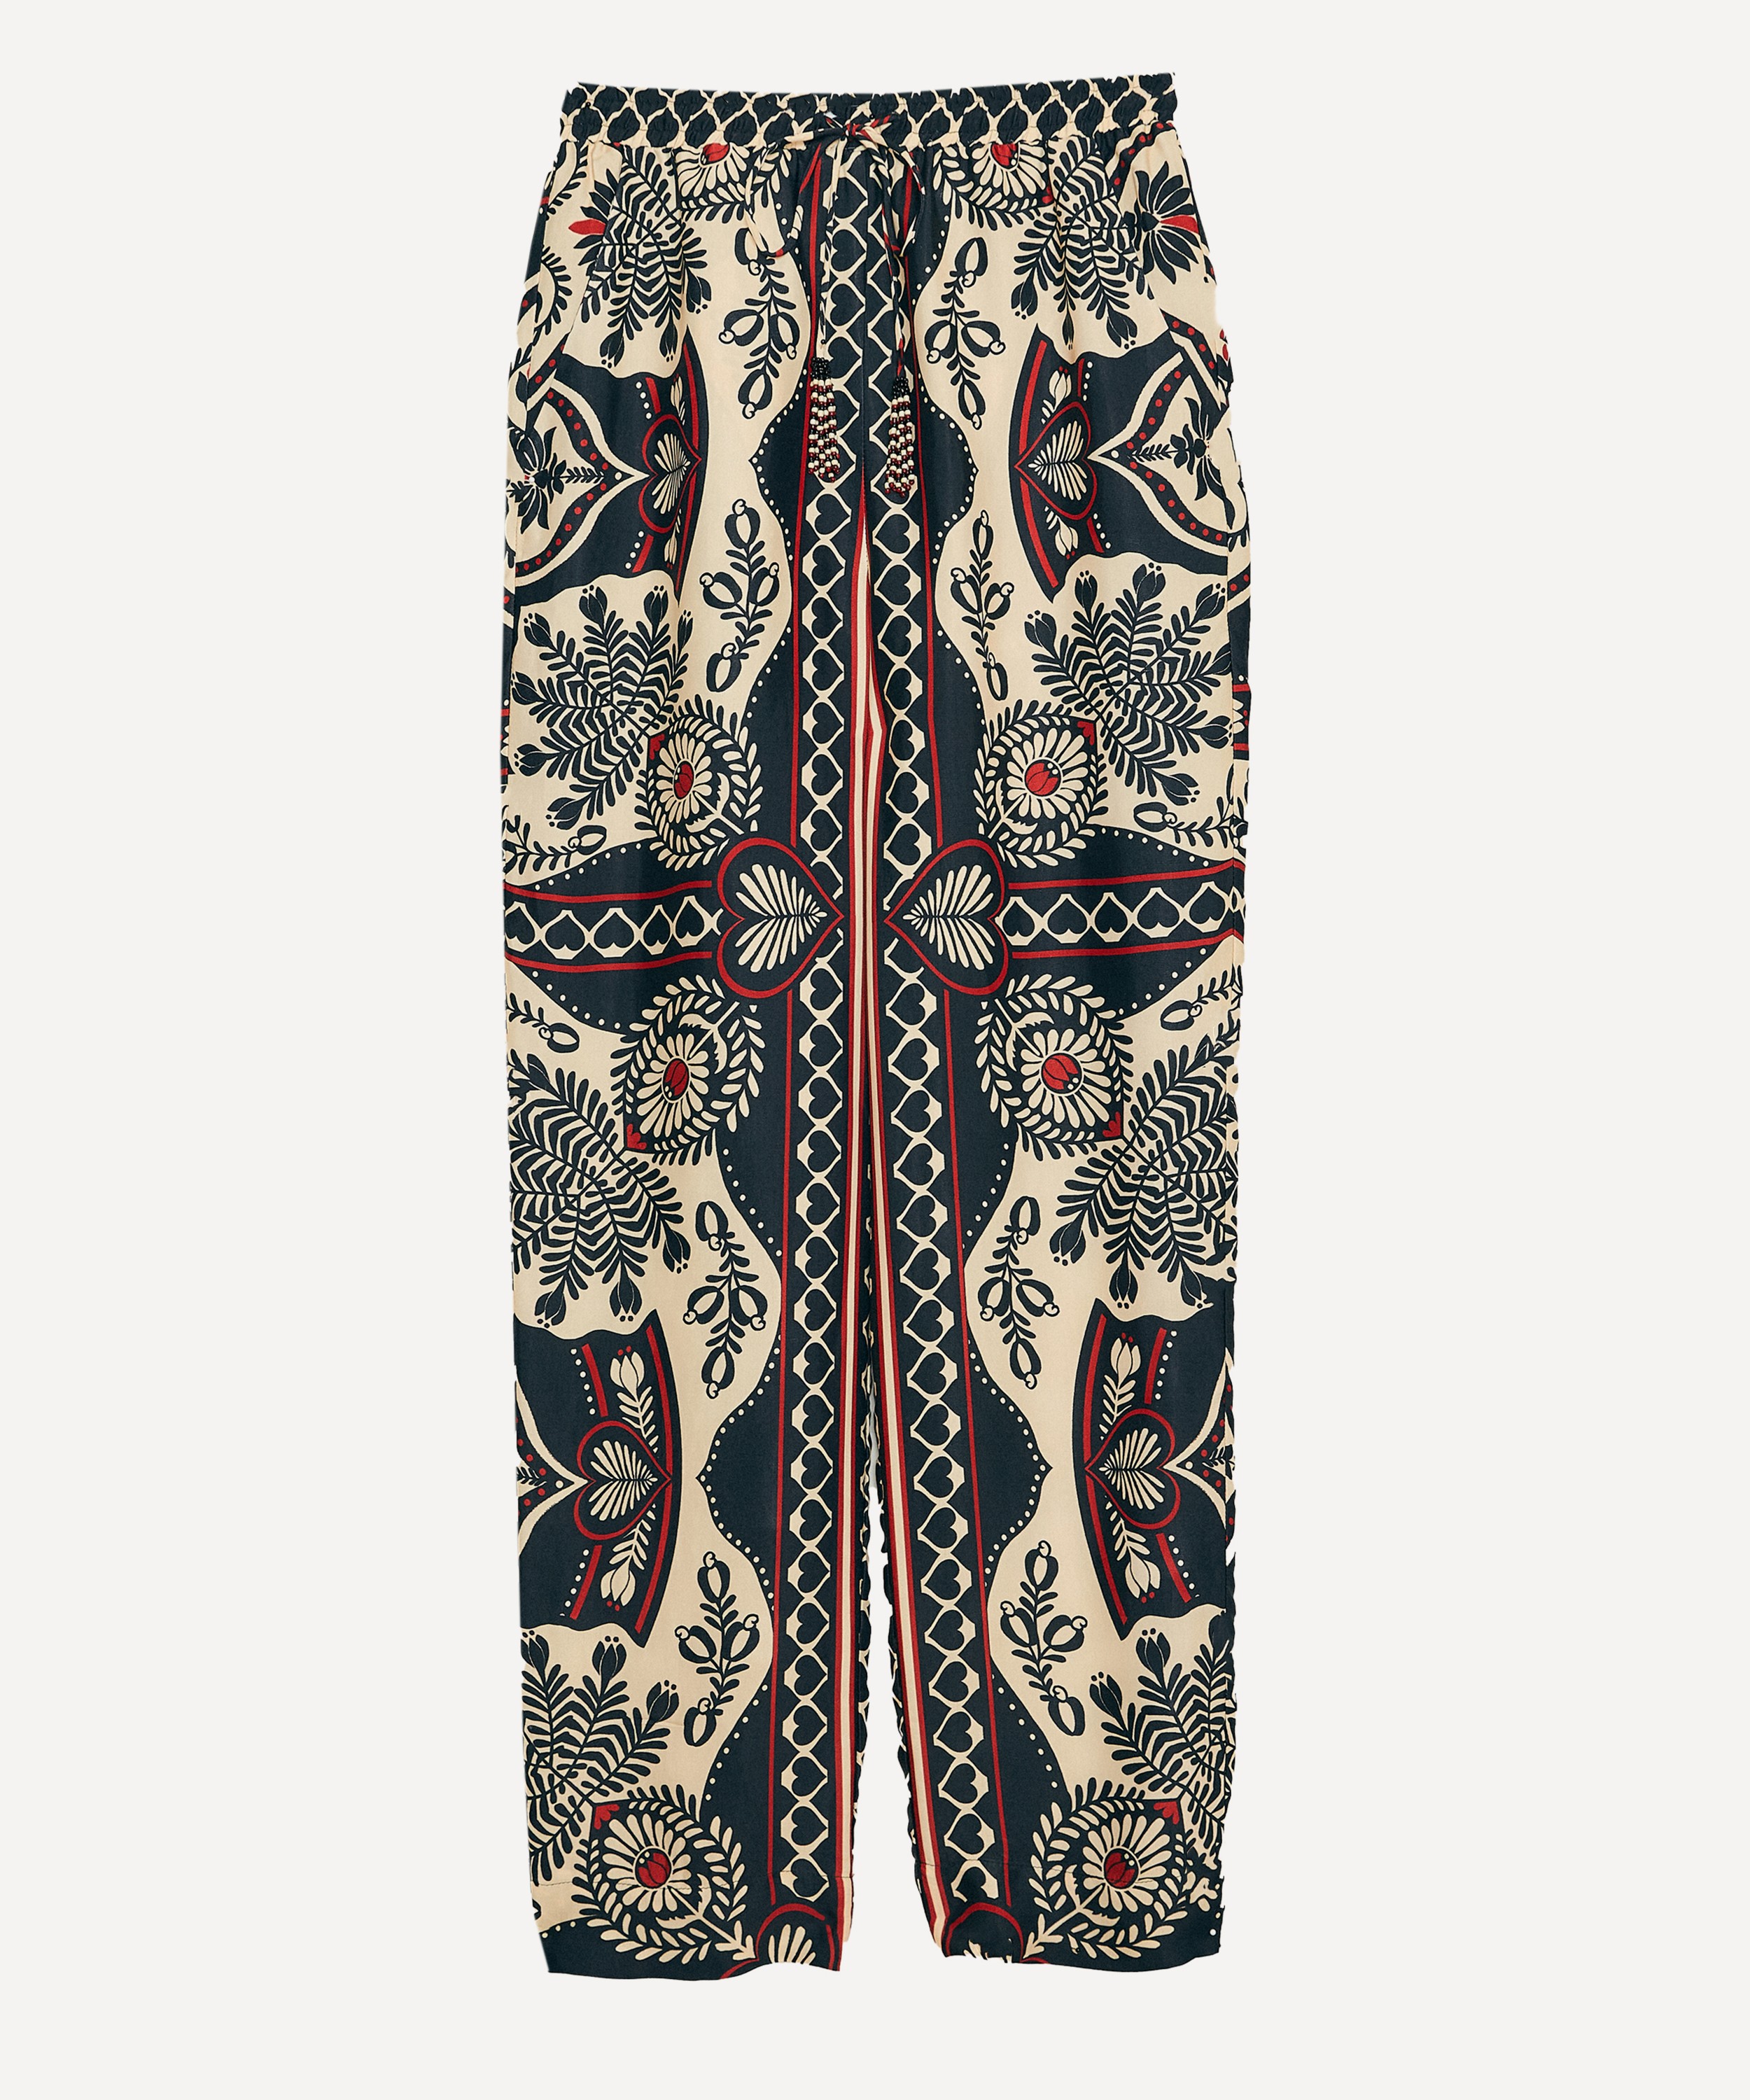 FARM Rio - Black Passion Scarf Trousers image number 0